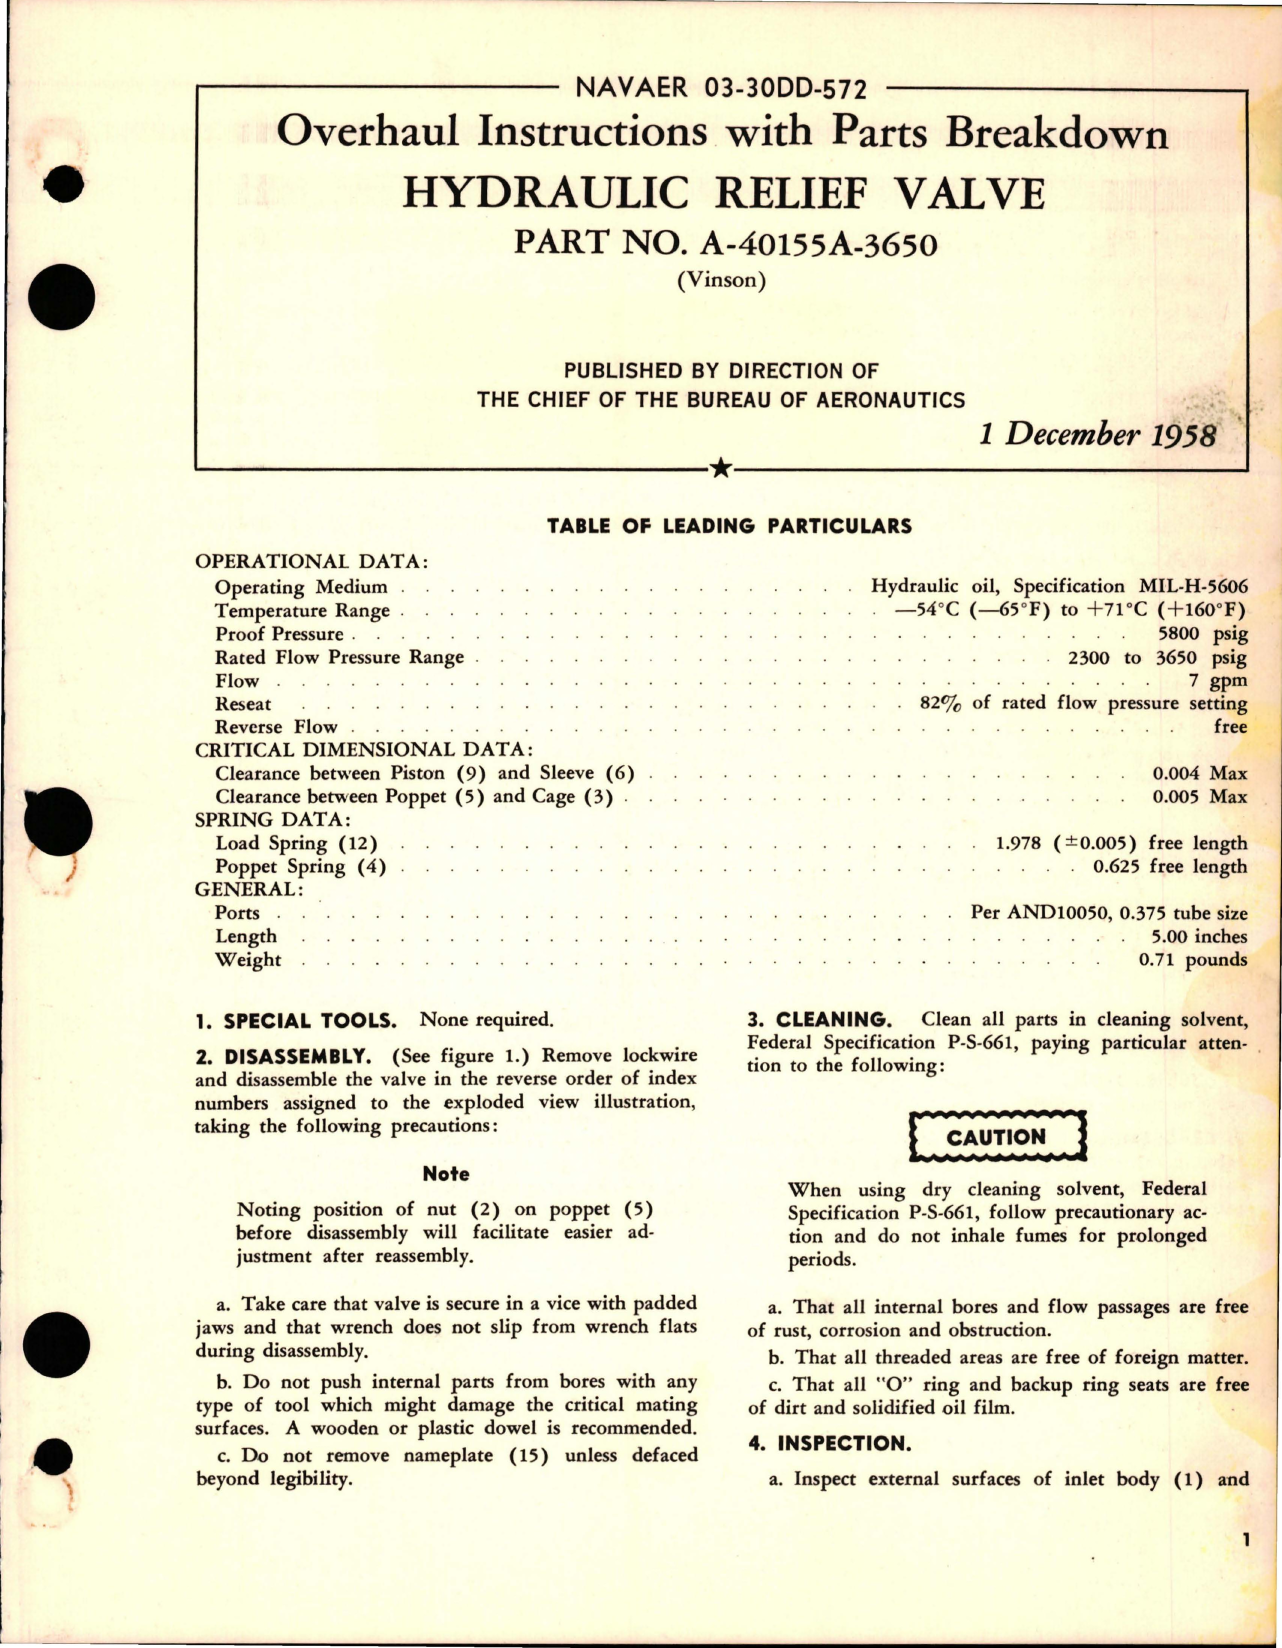 Sample page 1 from AirCorps Library document: Overhaul Instructions with Parts Breakdown for Hydraulic Relief Valve - Part A-40155A-3650 